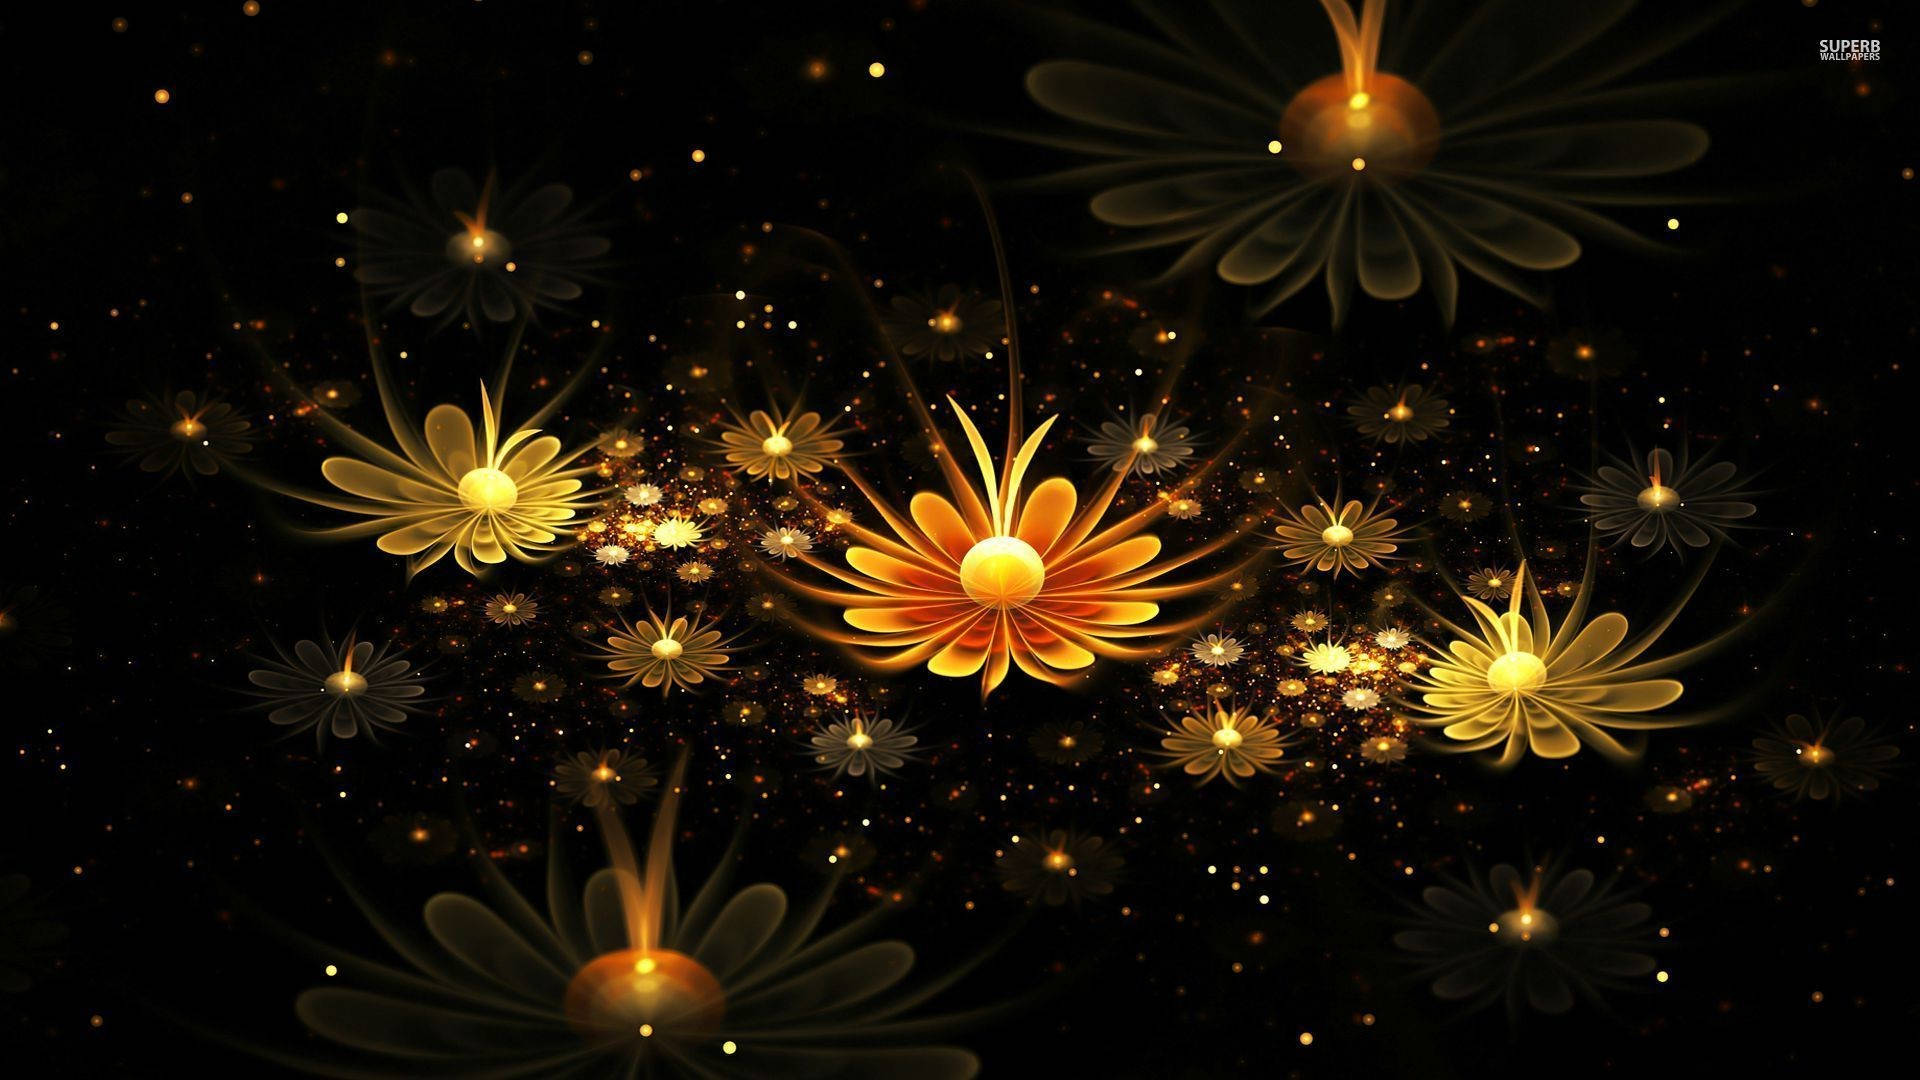 3d Desktop Glowing Yellow Daisies Picture